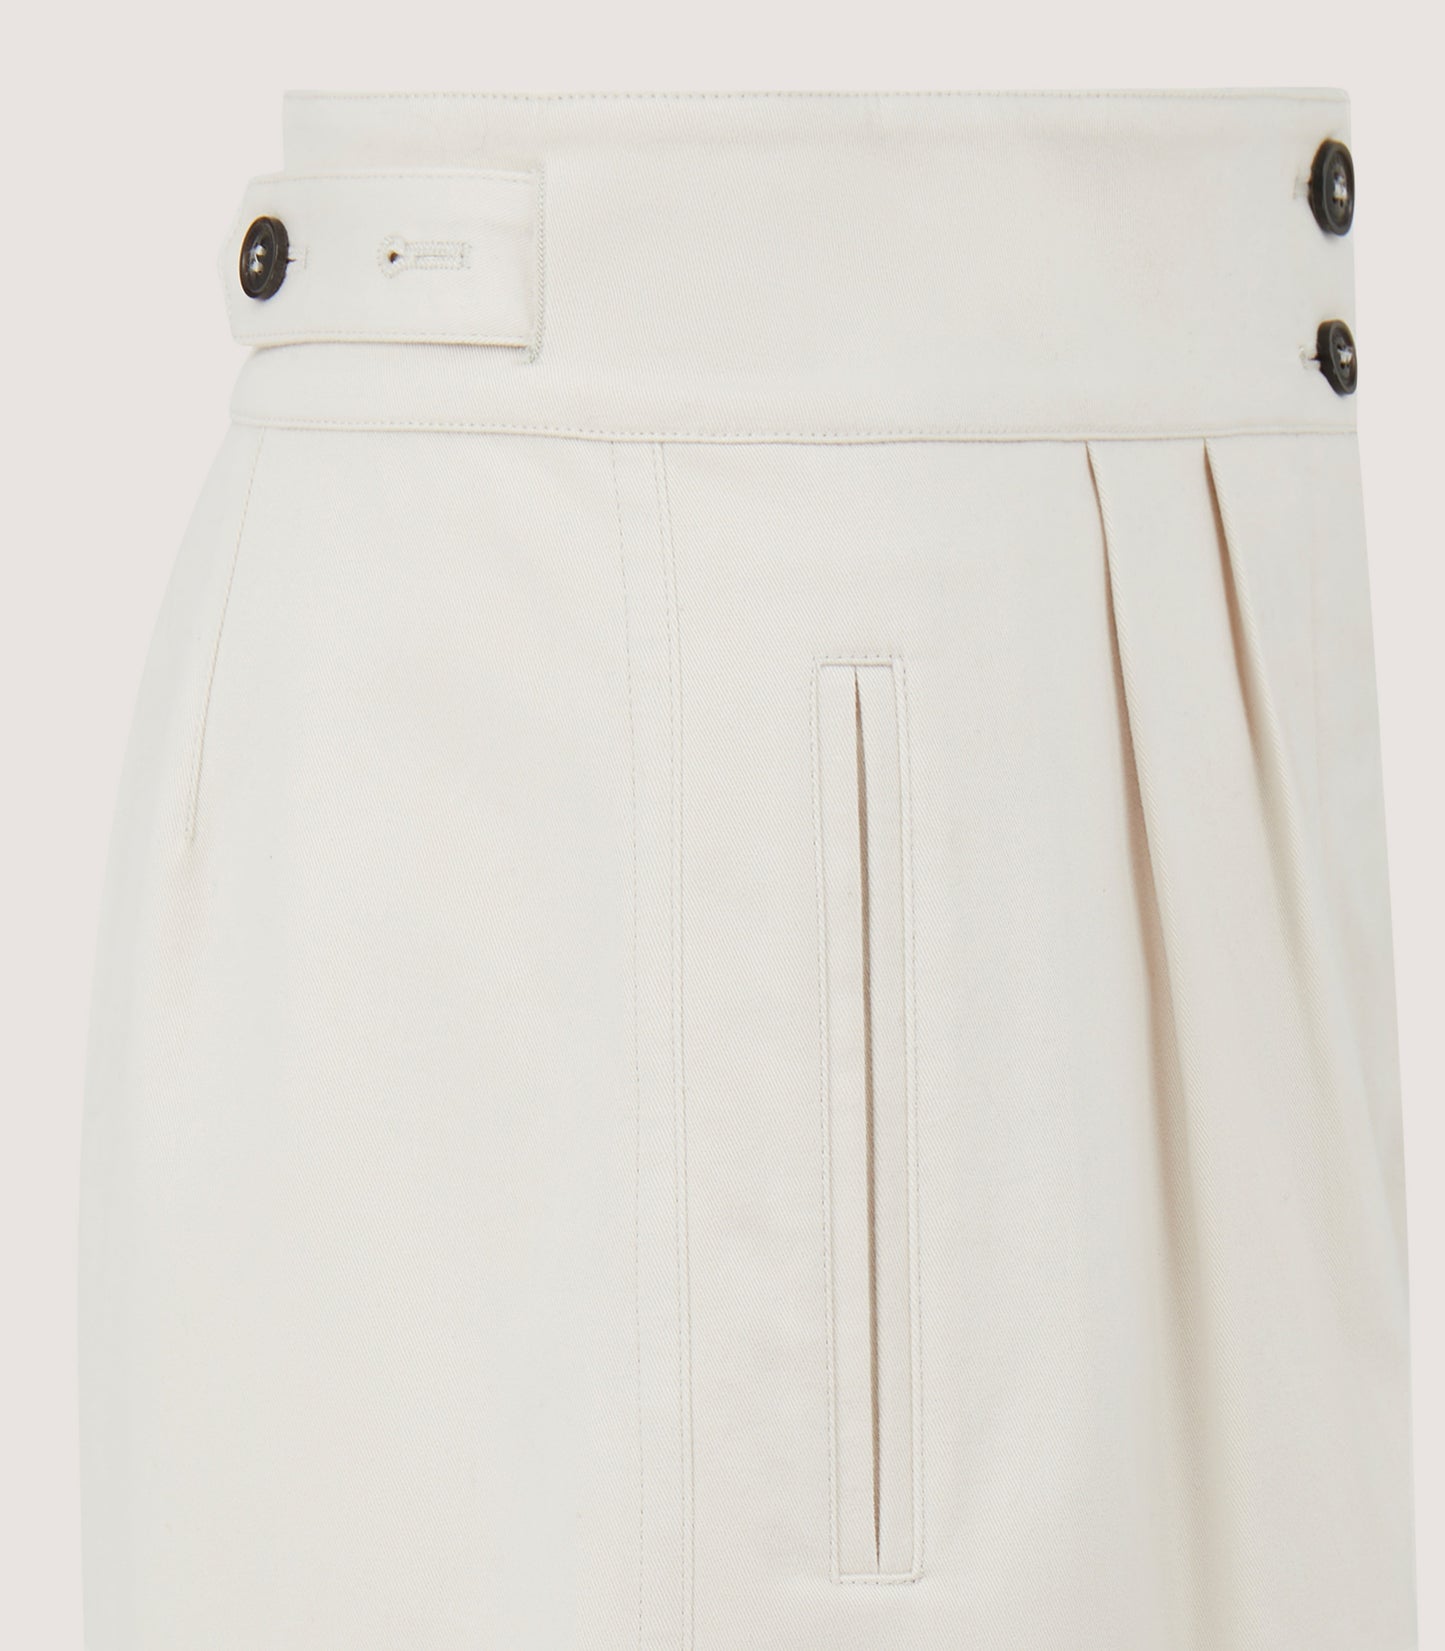 Double Pleat Shorts In Ivory